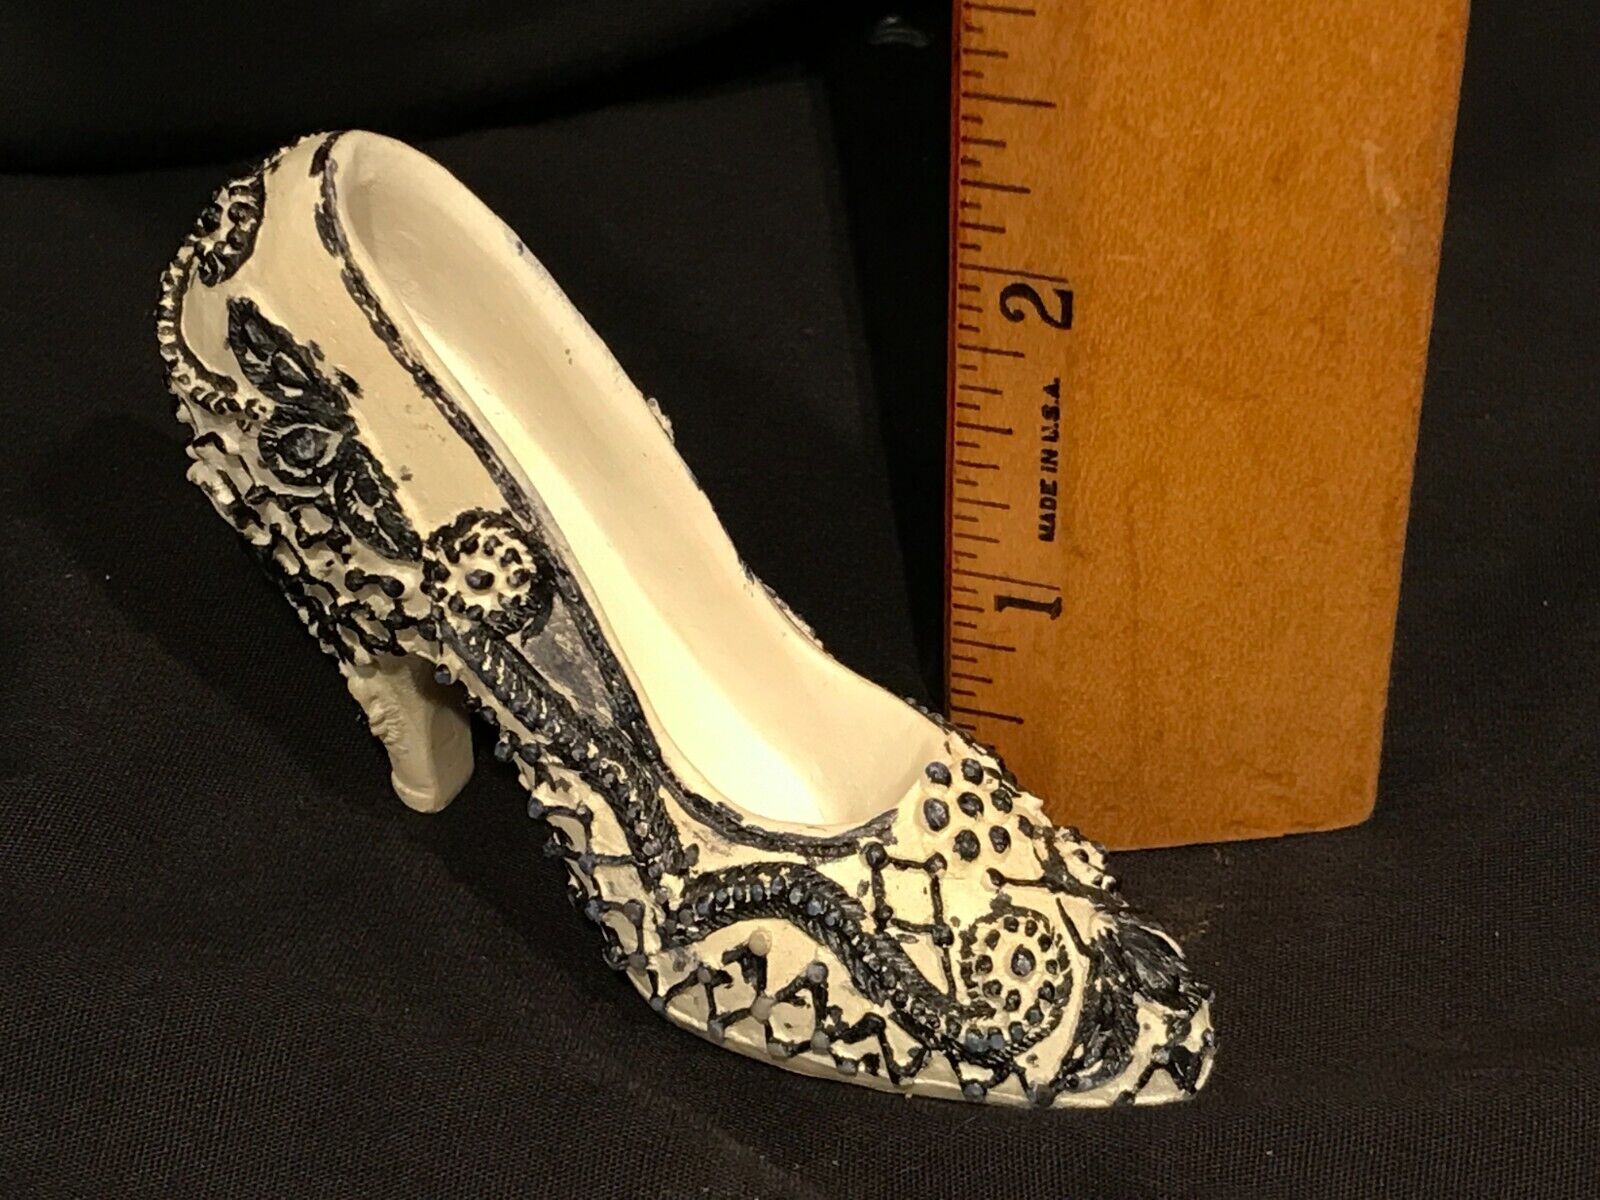 Miniature Resin High Heel Shoe White with Black Design - about 2 x 3 Inches